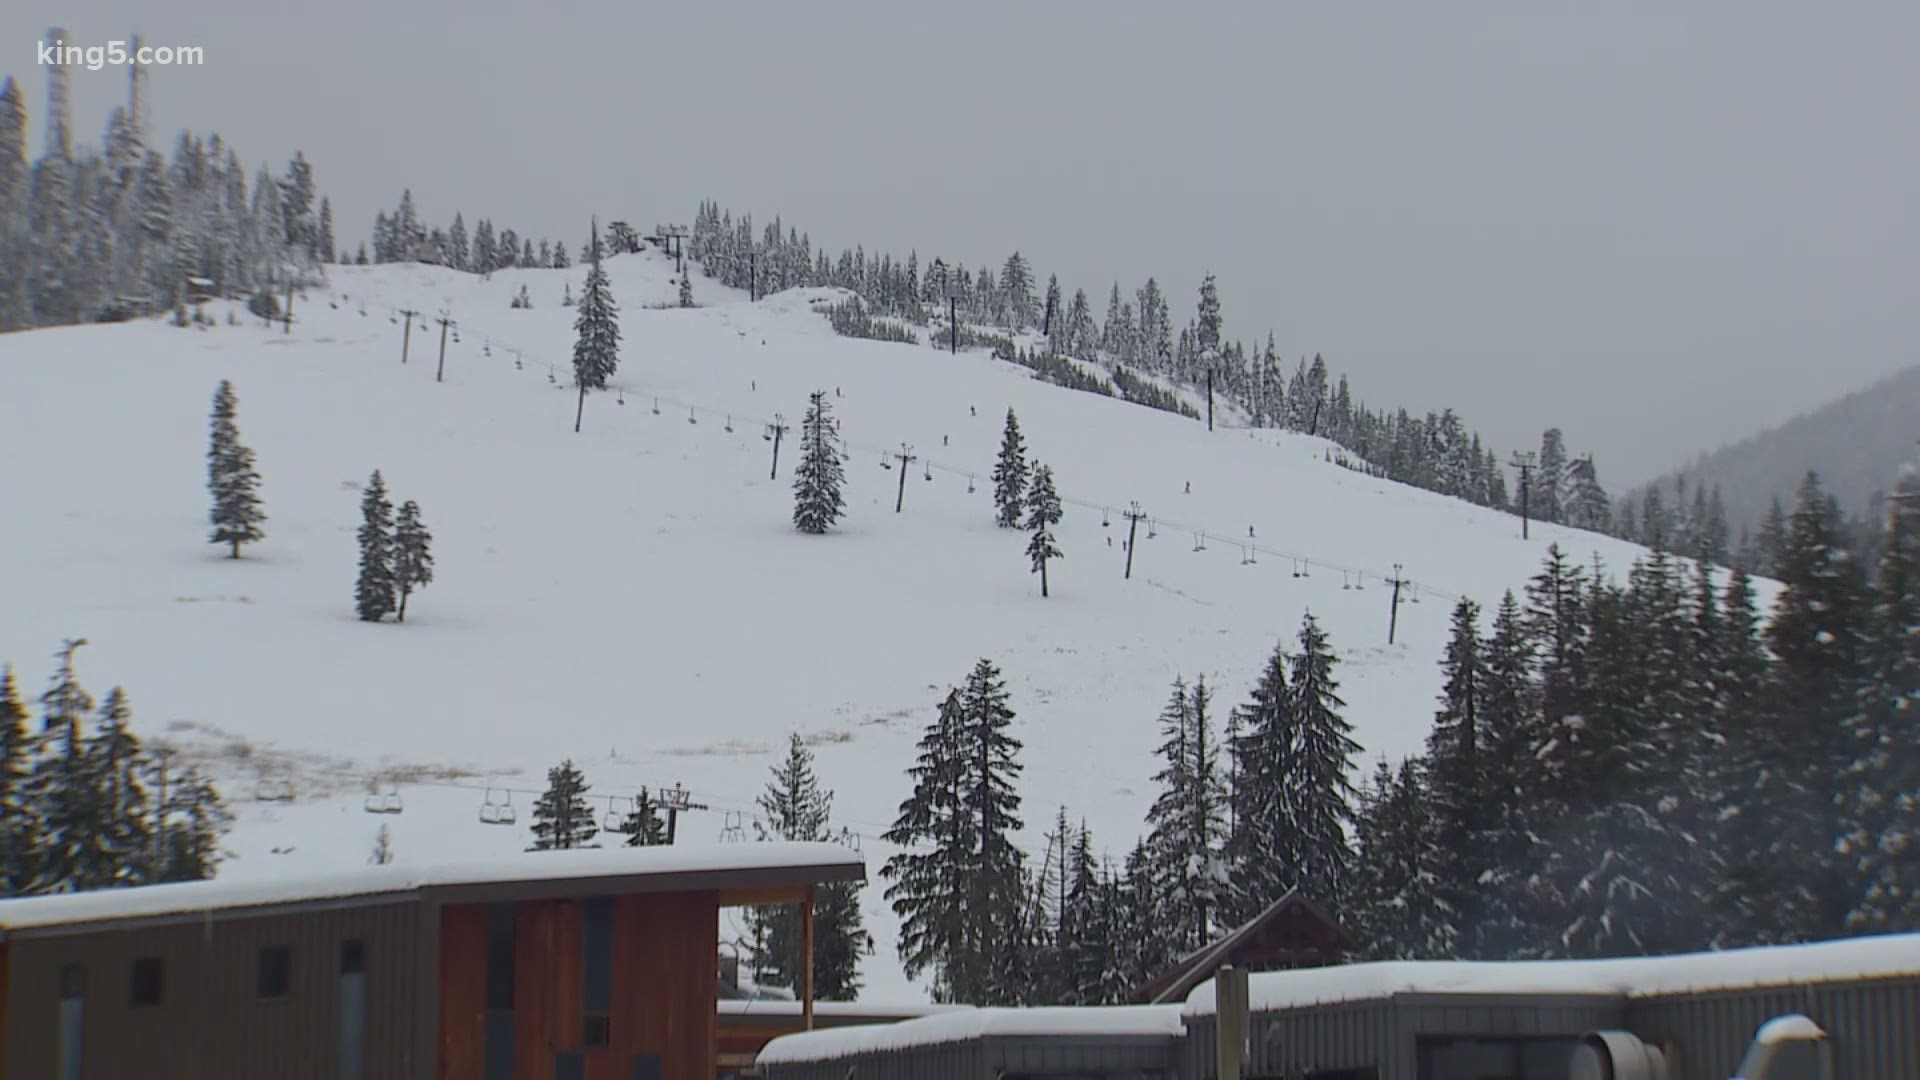 People enjoyed the snow at Snoqualmie Pass on Saturday. The forecast shows a break Sunday and then more rain and wind on the way to start the week.